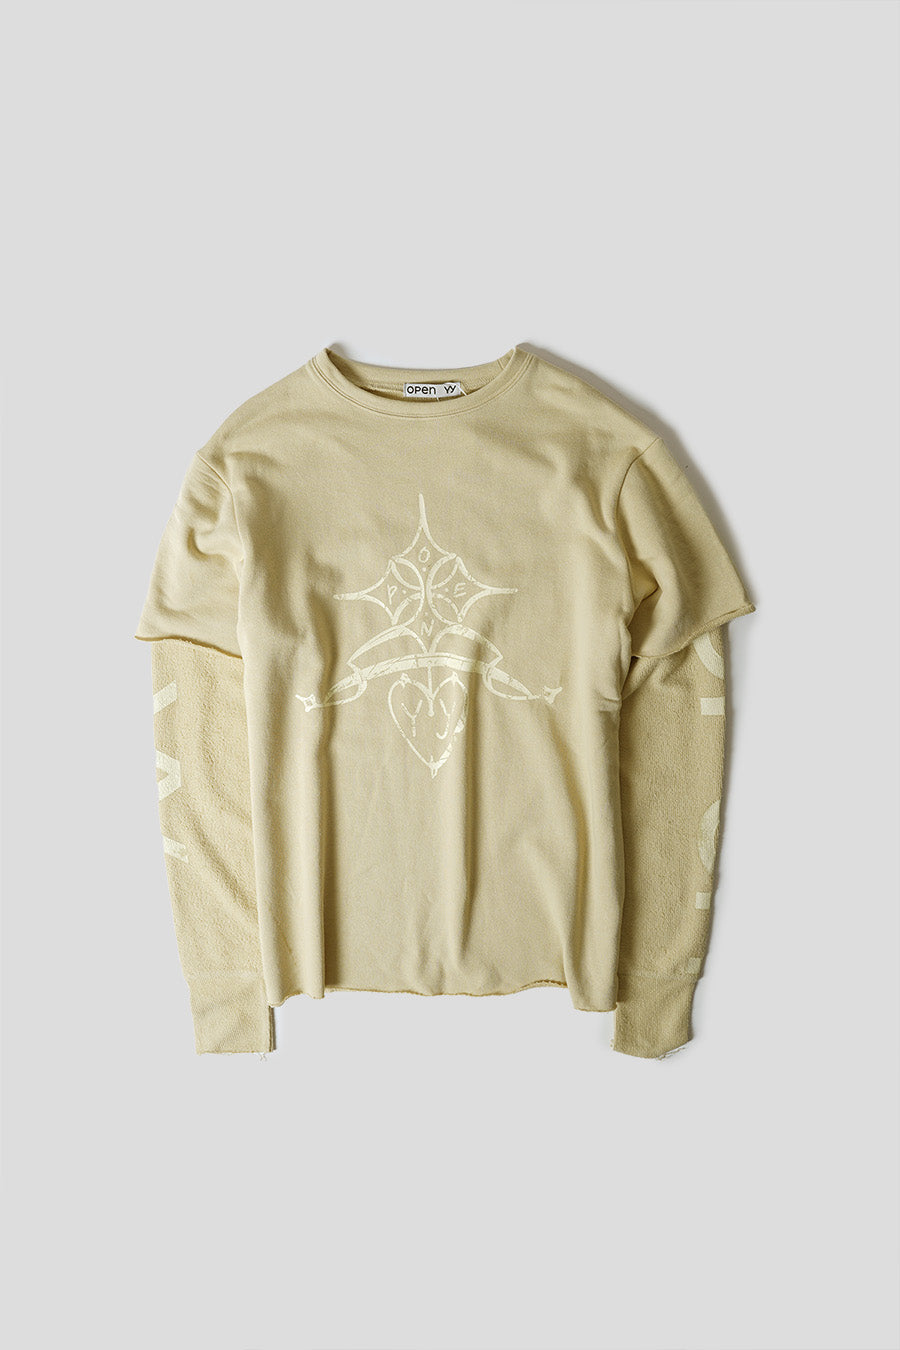 Open YY - LONG-SLEEVED T-SHIRT WITH YELLOW EMBLEM - LE LABO STORE